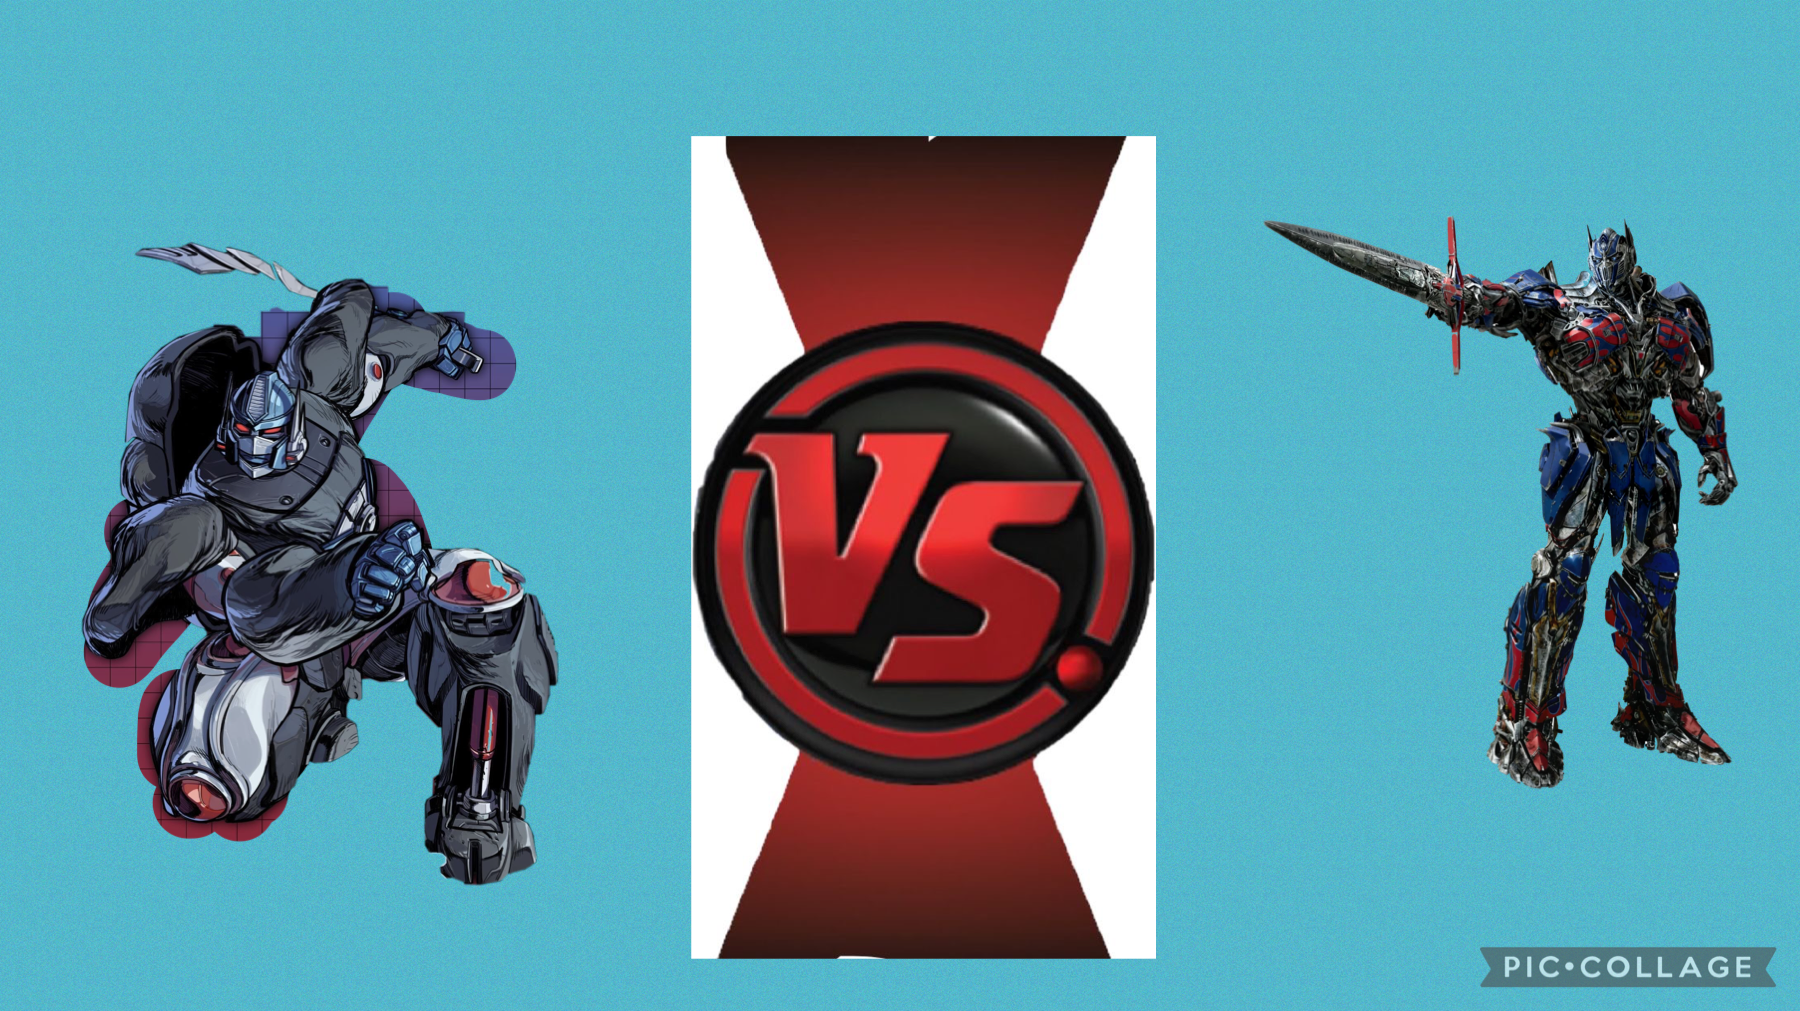 Who would win Optimus prime or Optimus prime